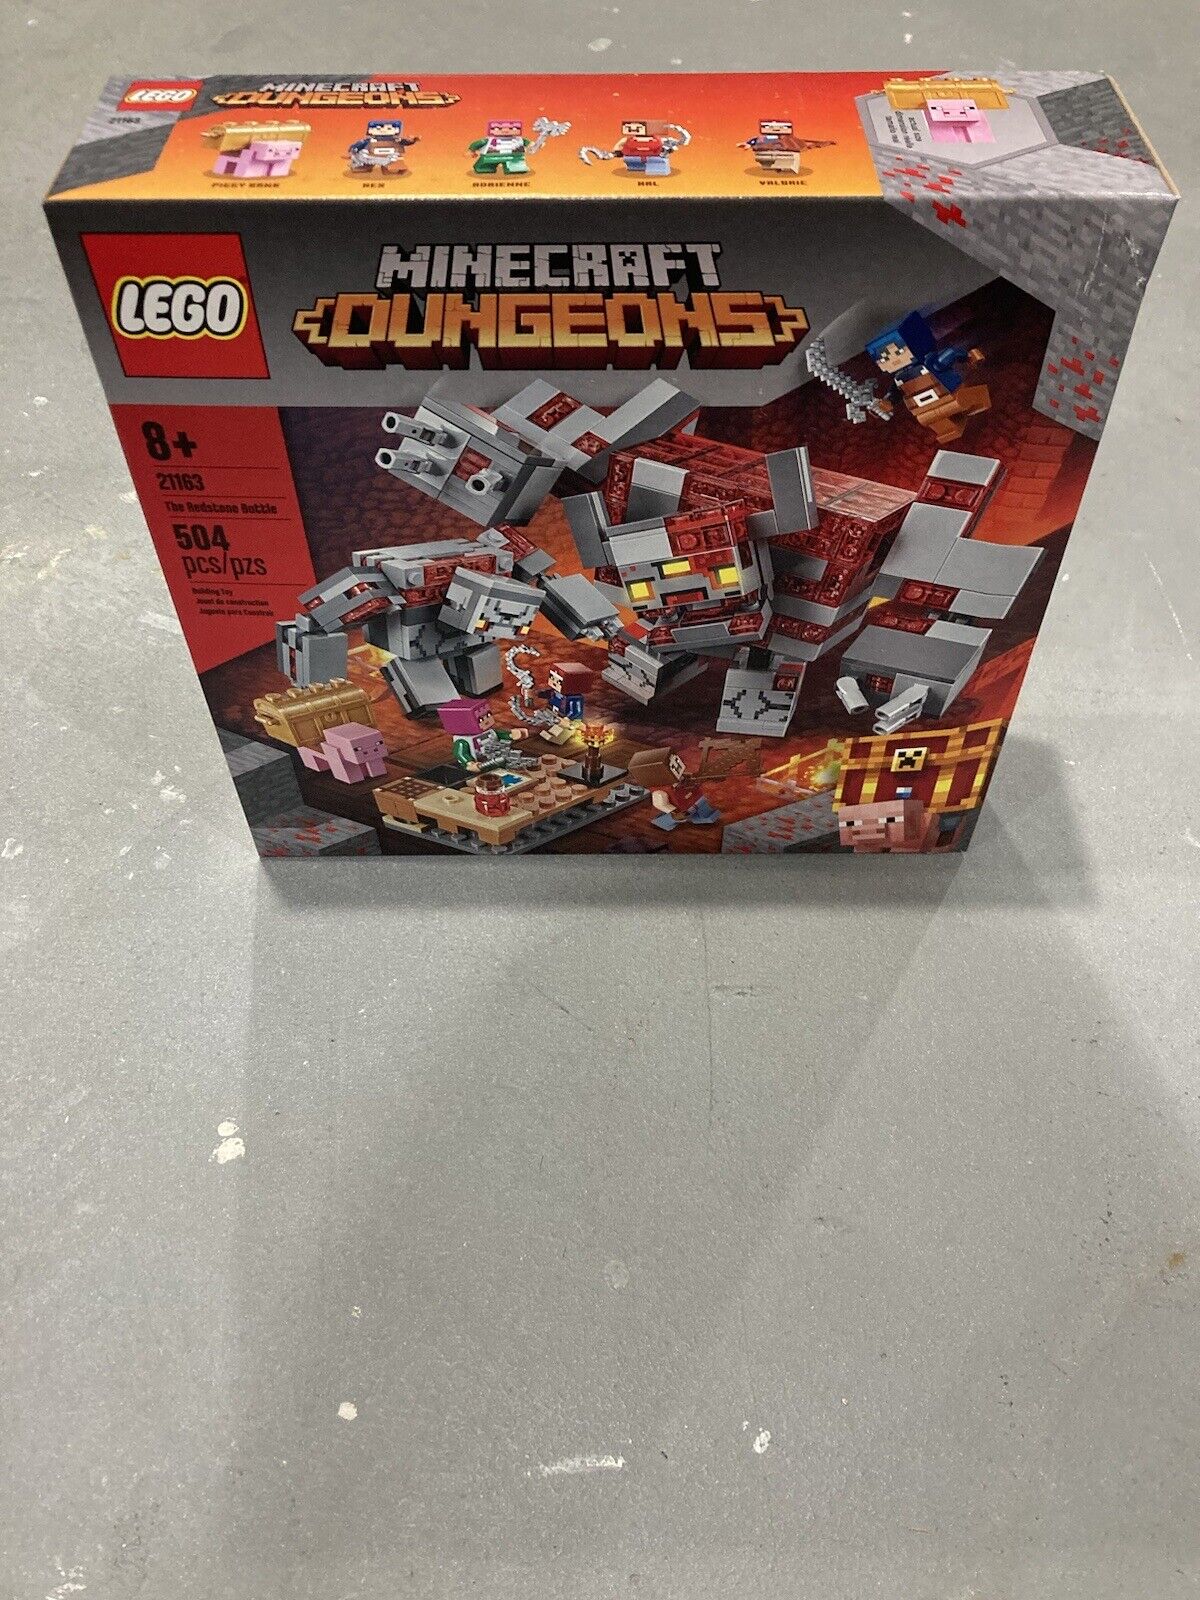 LEGO Minecraft Dungeons The Redstone Battle 21163 Retired New Sealed Box